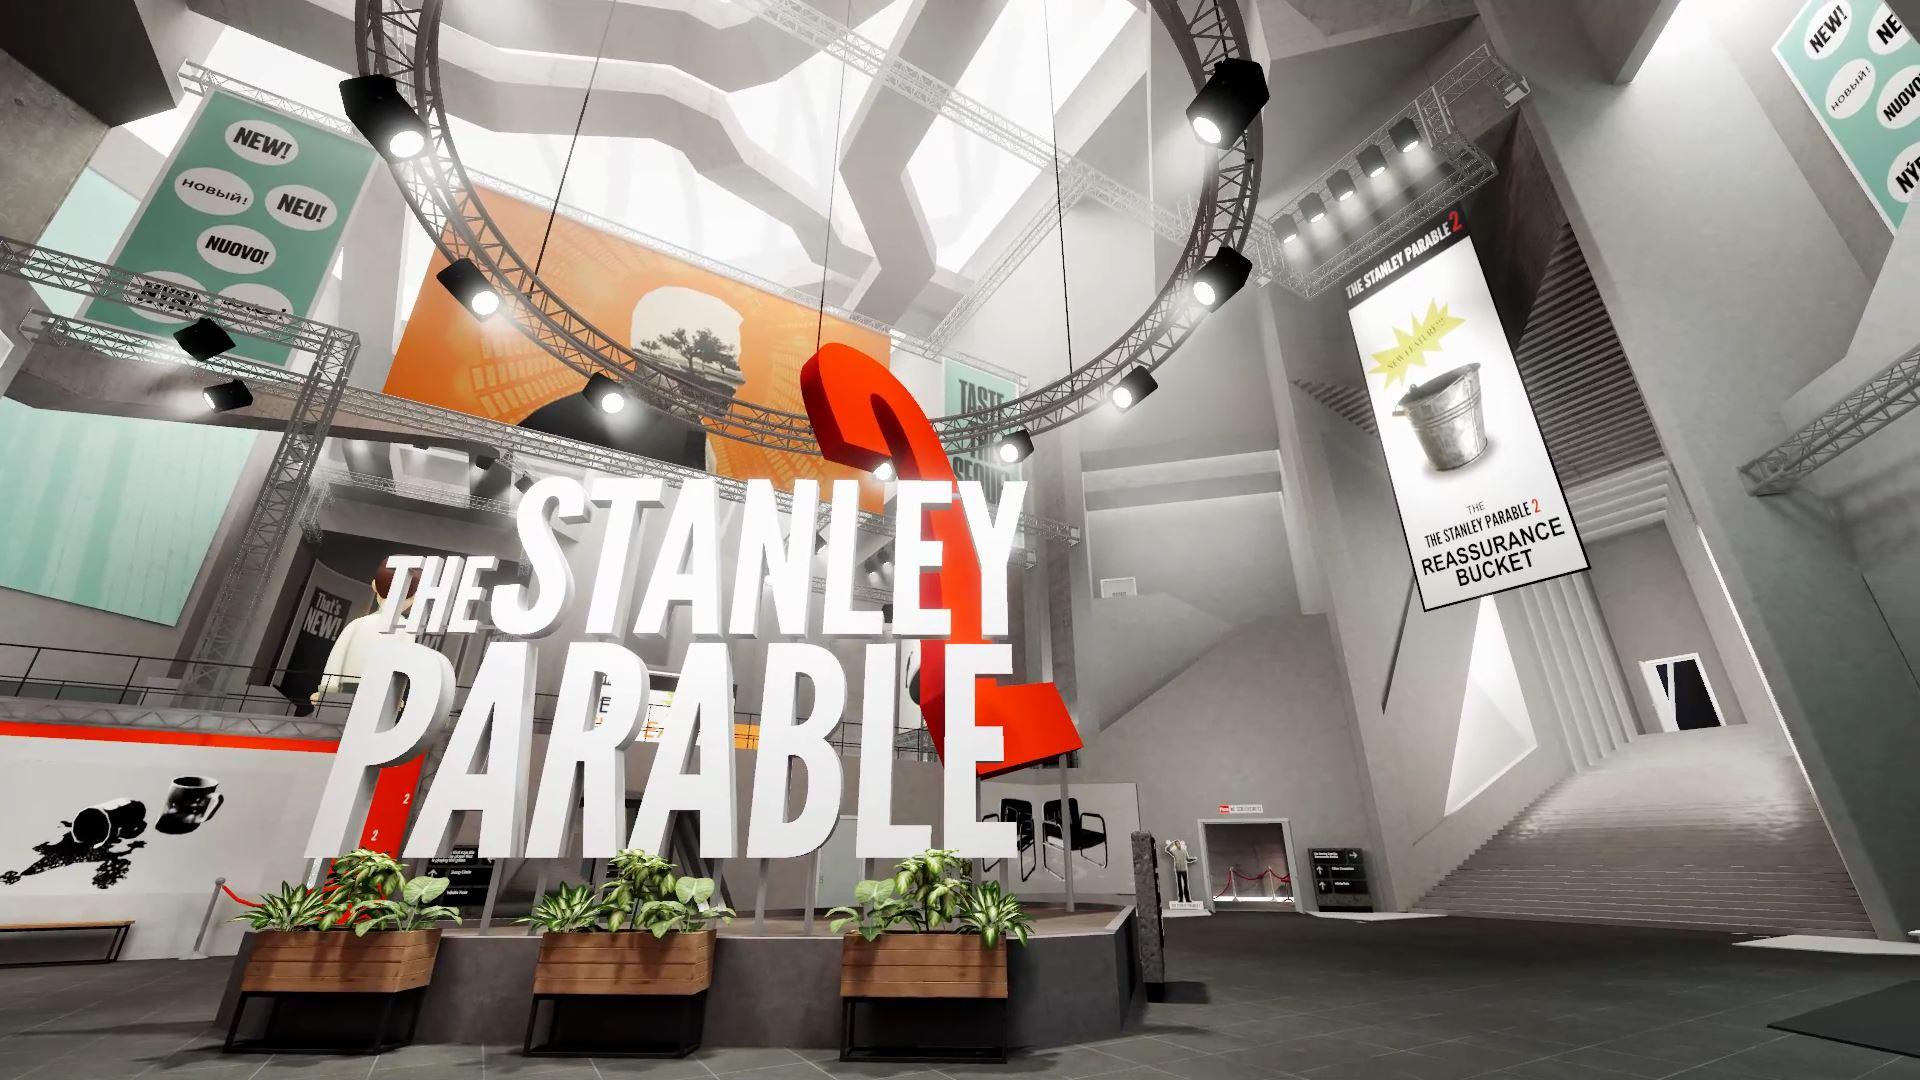 Parable ultra deluxe. The Stanley Parable Стэнли. The Stanley Parable: Ultra Deluxe. Стэнли парабл 2. Игра the Stanley Parable.